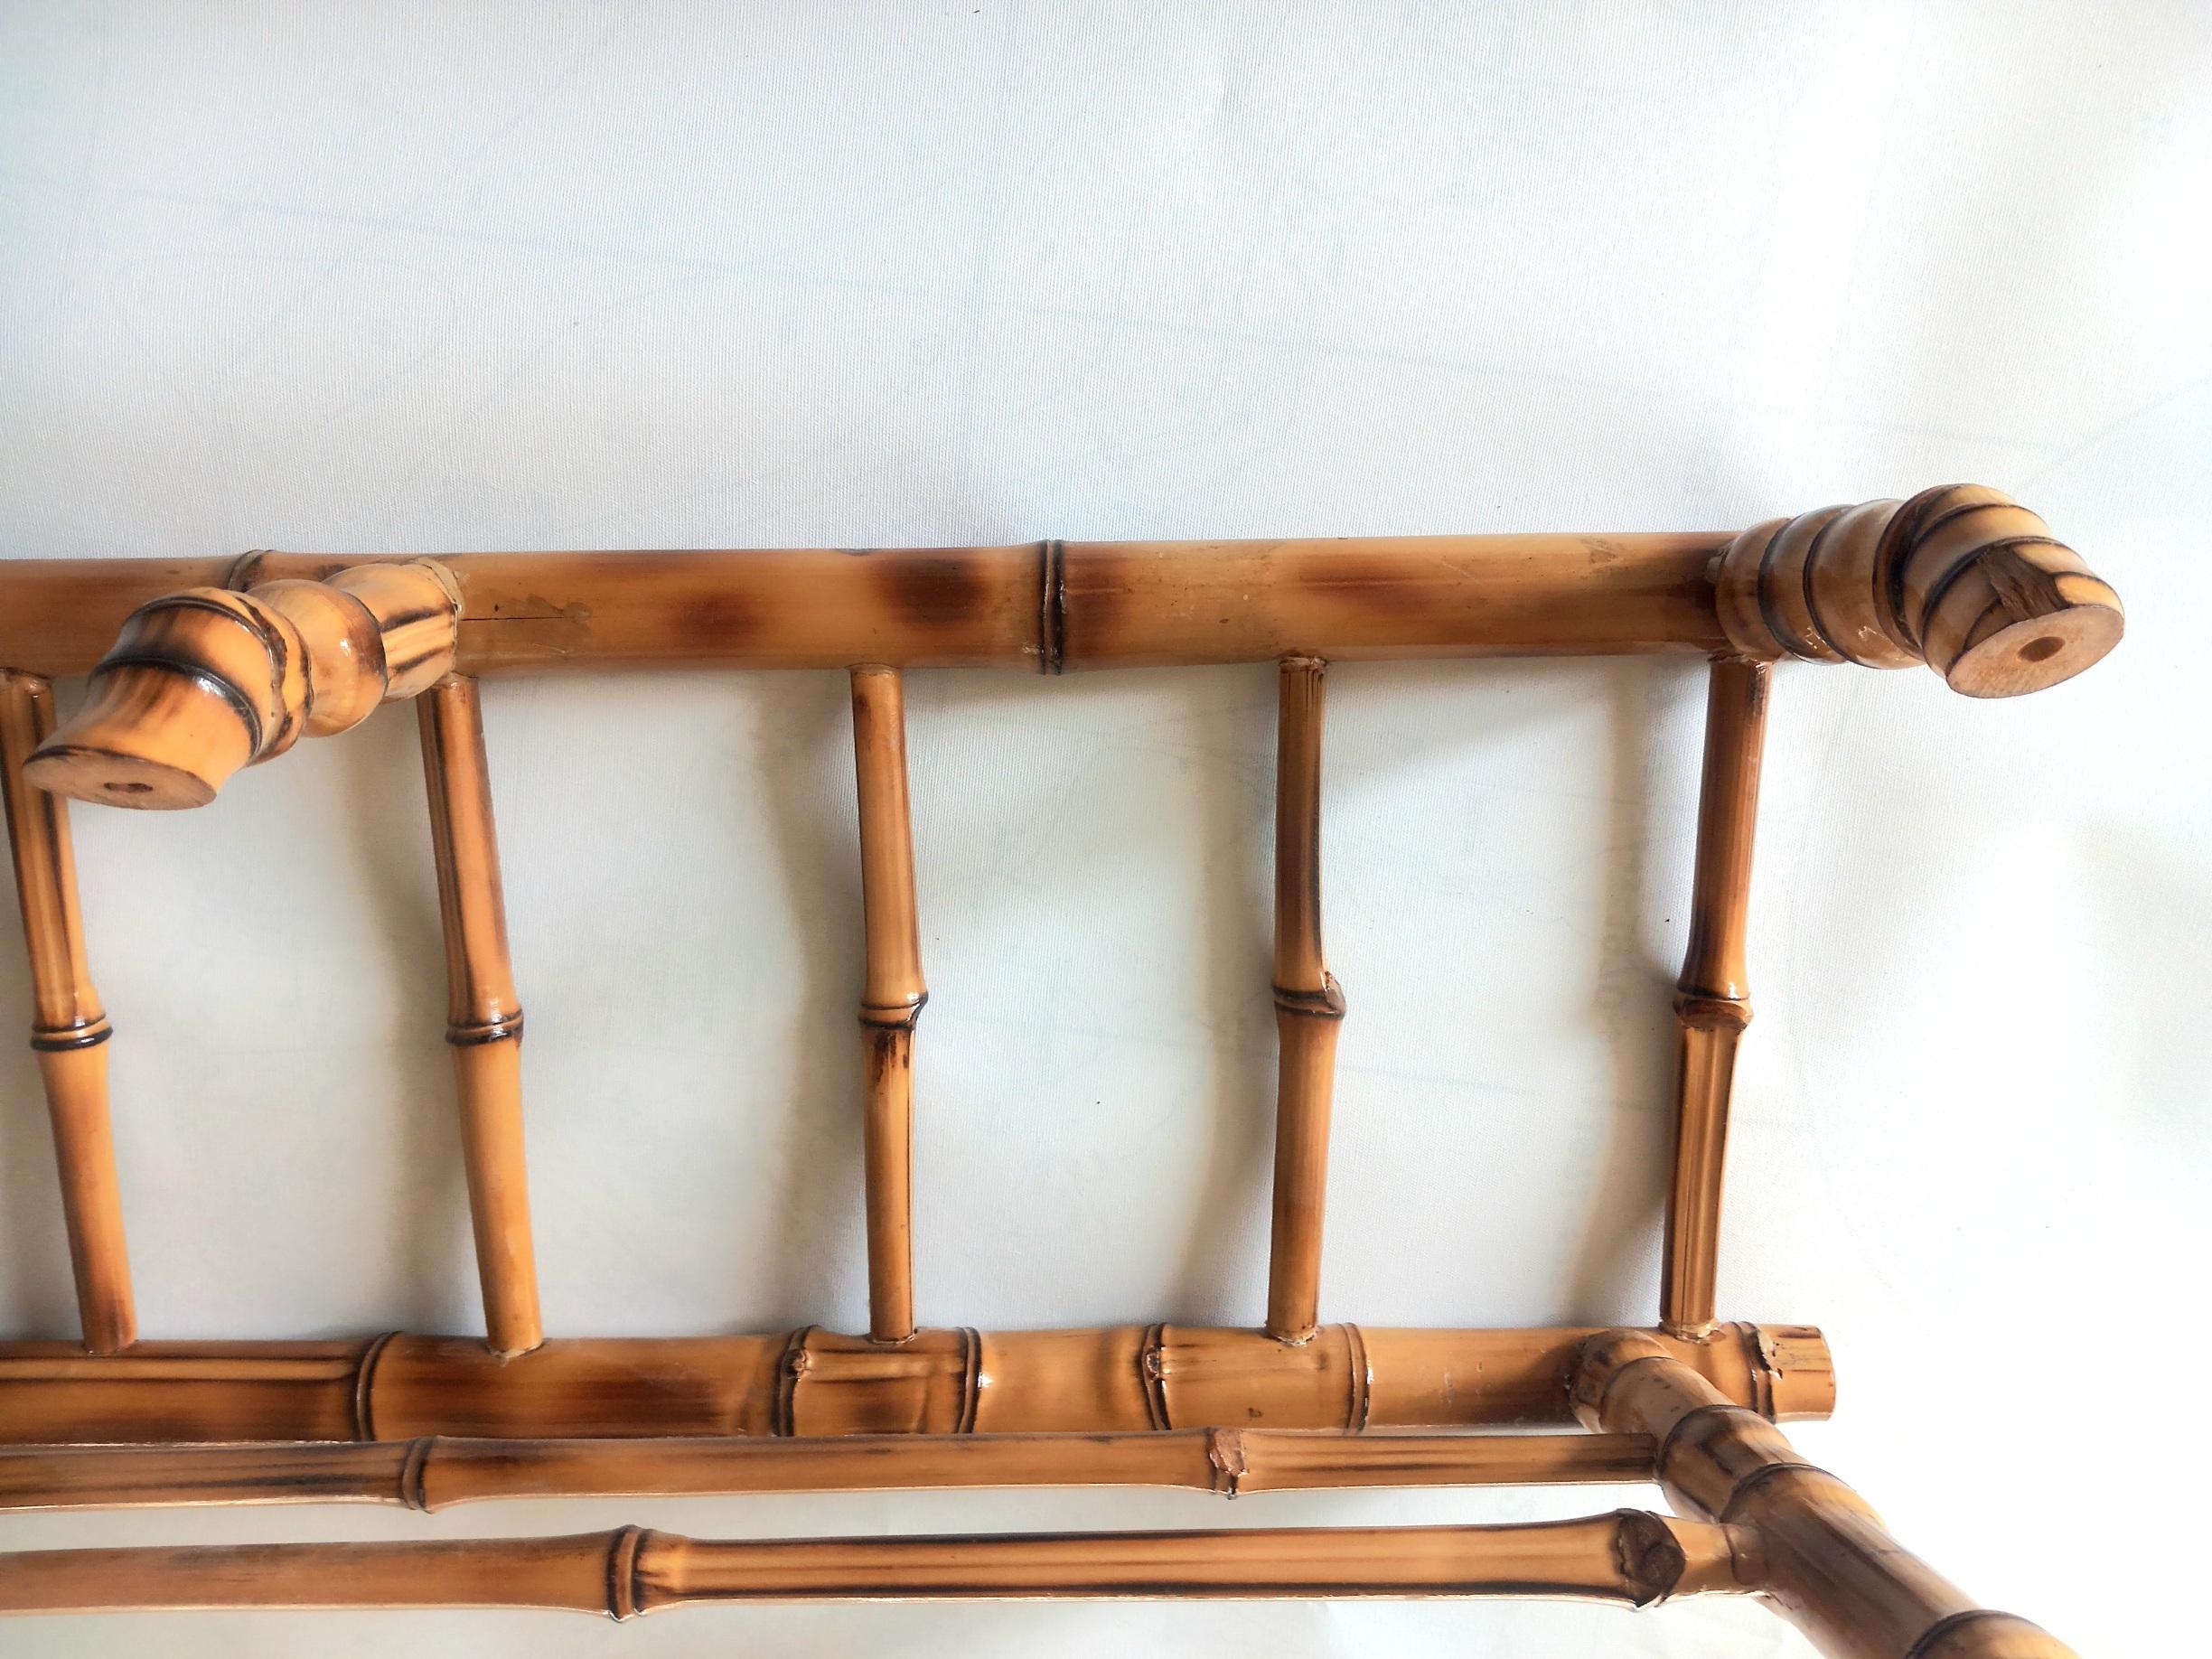 Beautiful Bamboo Coat Rack Three Hangers Top Shelf for Hats or Bags, Spain In Excellent Condition For Sale In Mombuey, Zamora